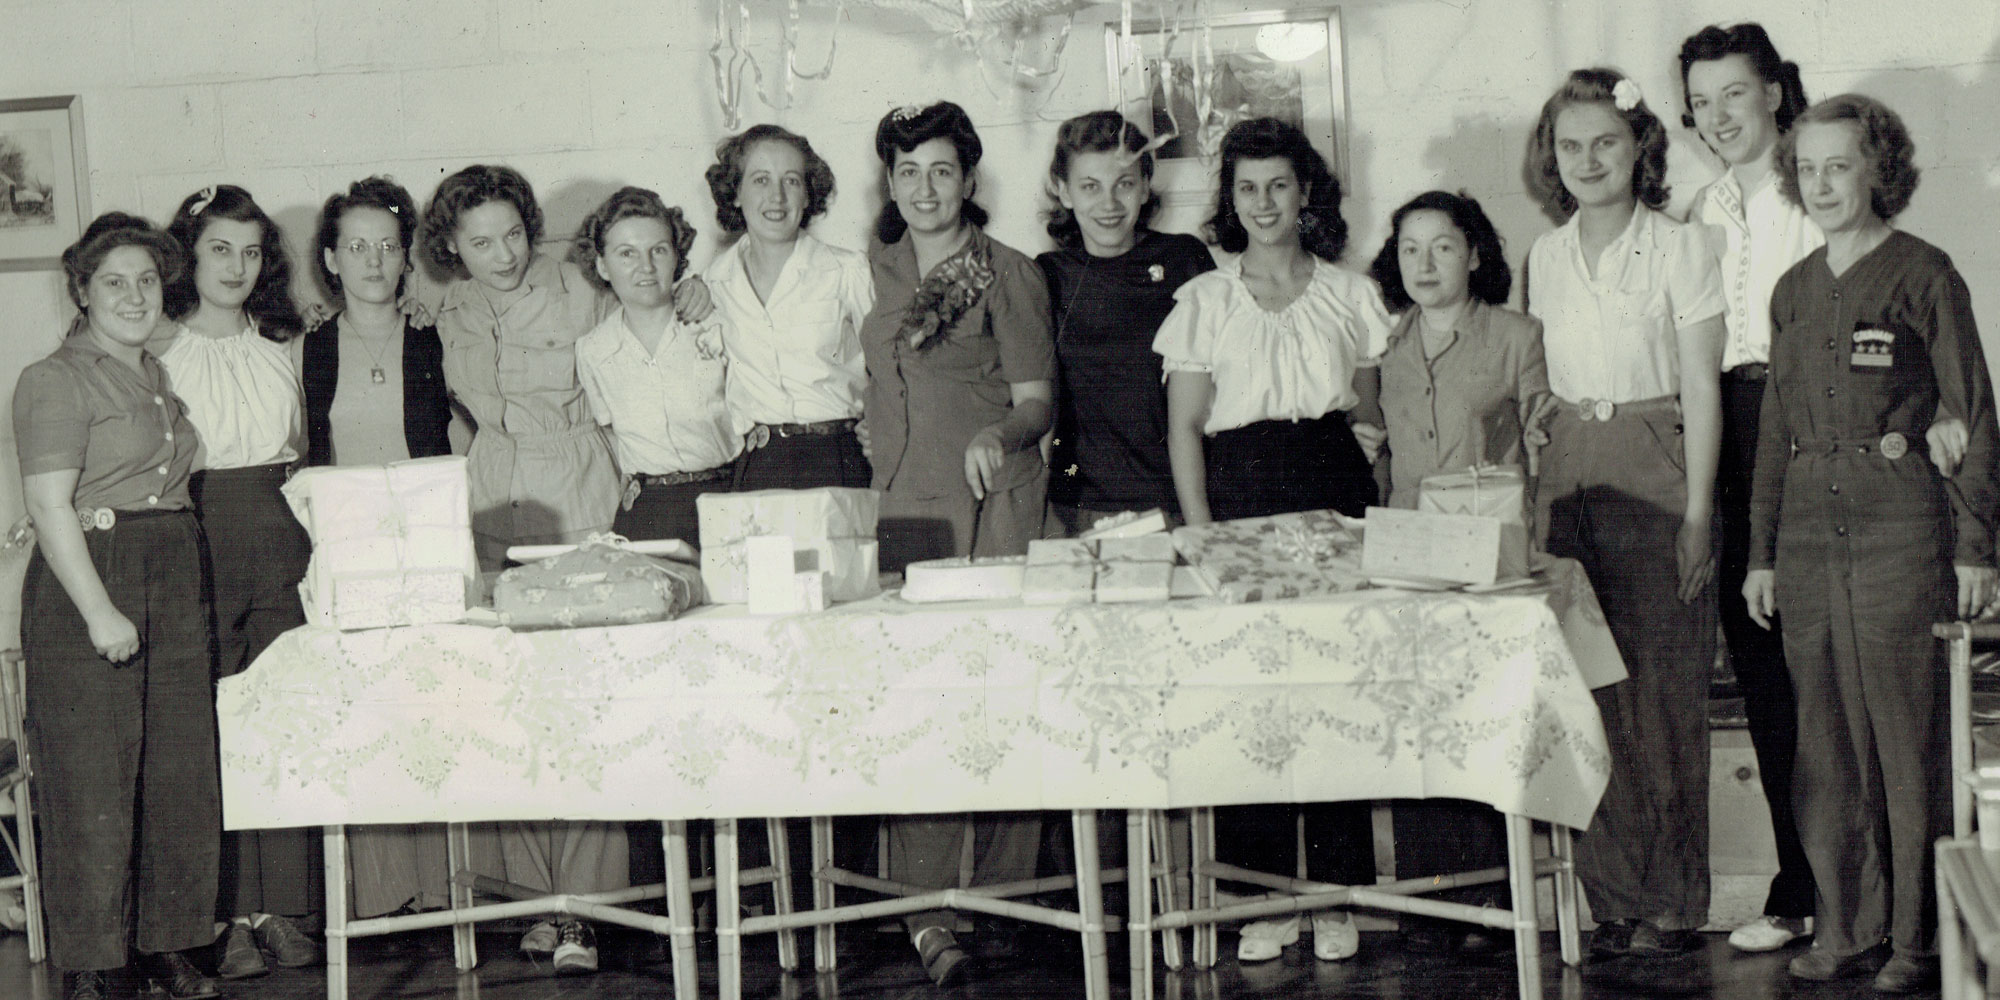 Black and white photo of workiing women during world war II celebrating with a party. 